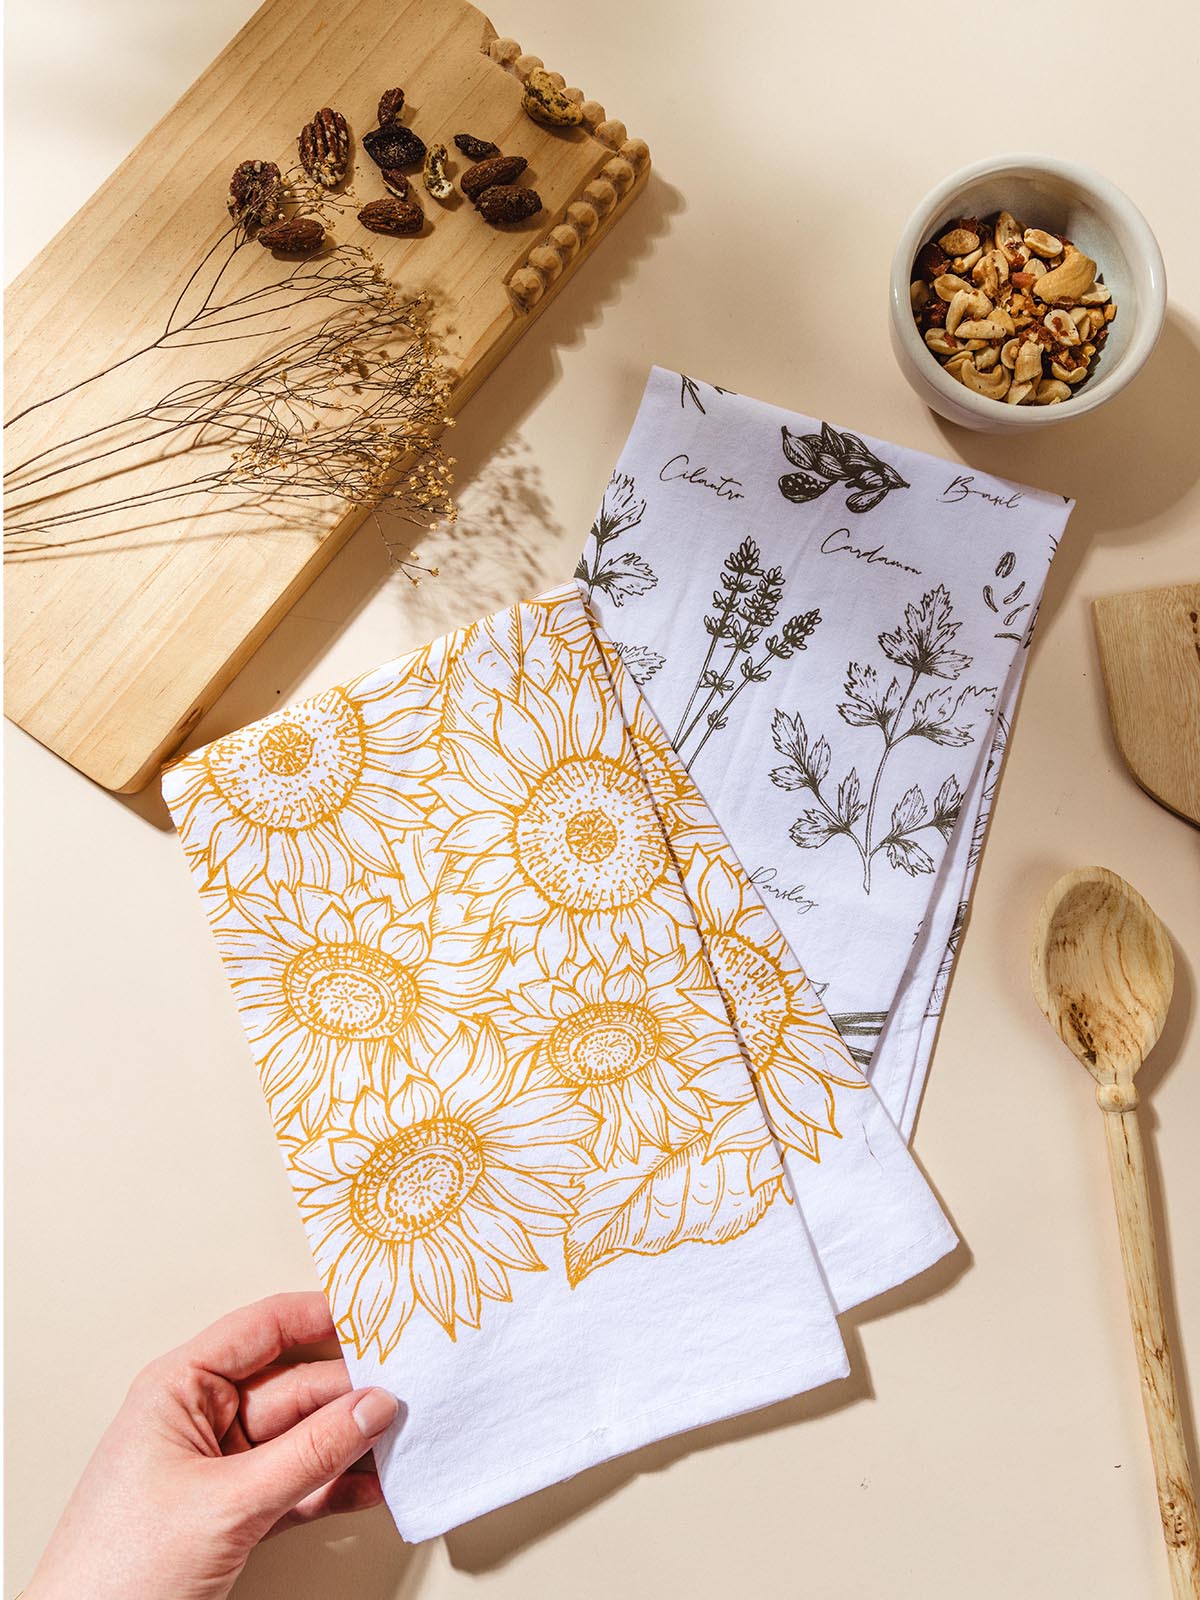 Watercolor tea towels on cream surface with hand touching the sunflower pattern tea towel. Featured: cutting board, wooden utensils, flowers, and food for styling. 